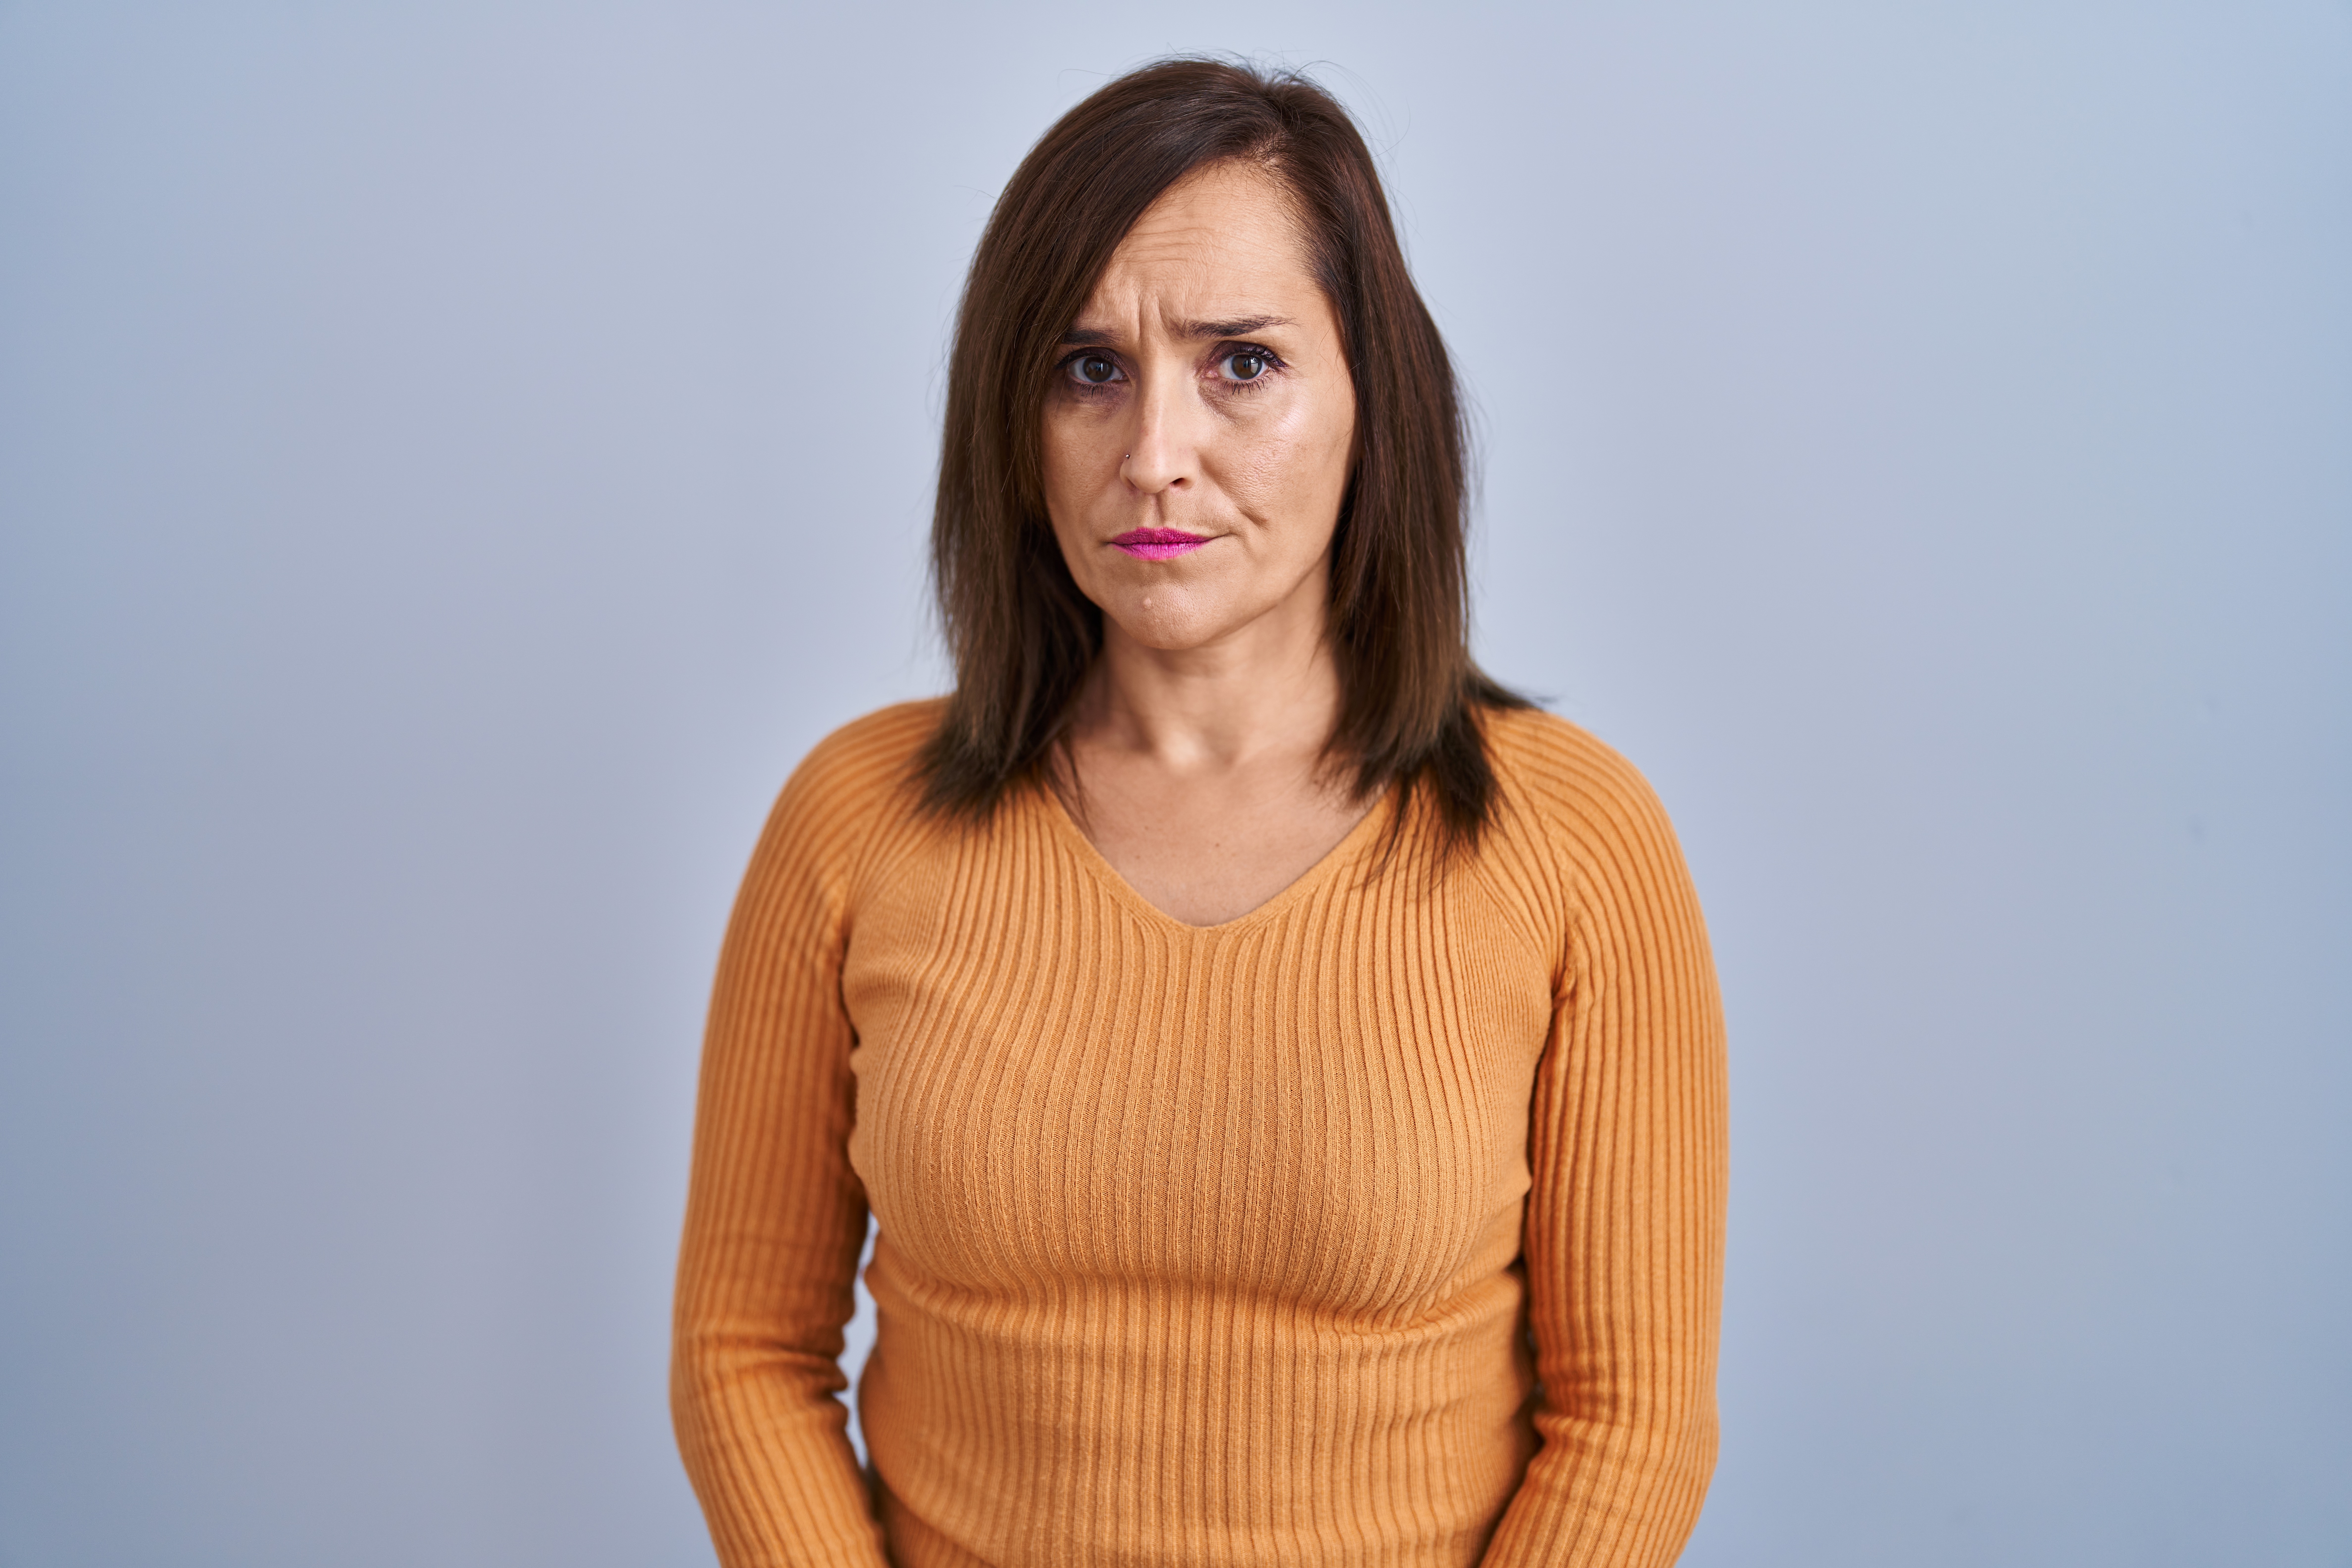 A woman looking angry | Source: Shutterstock